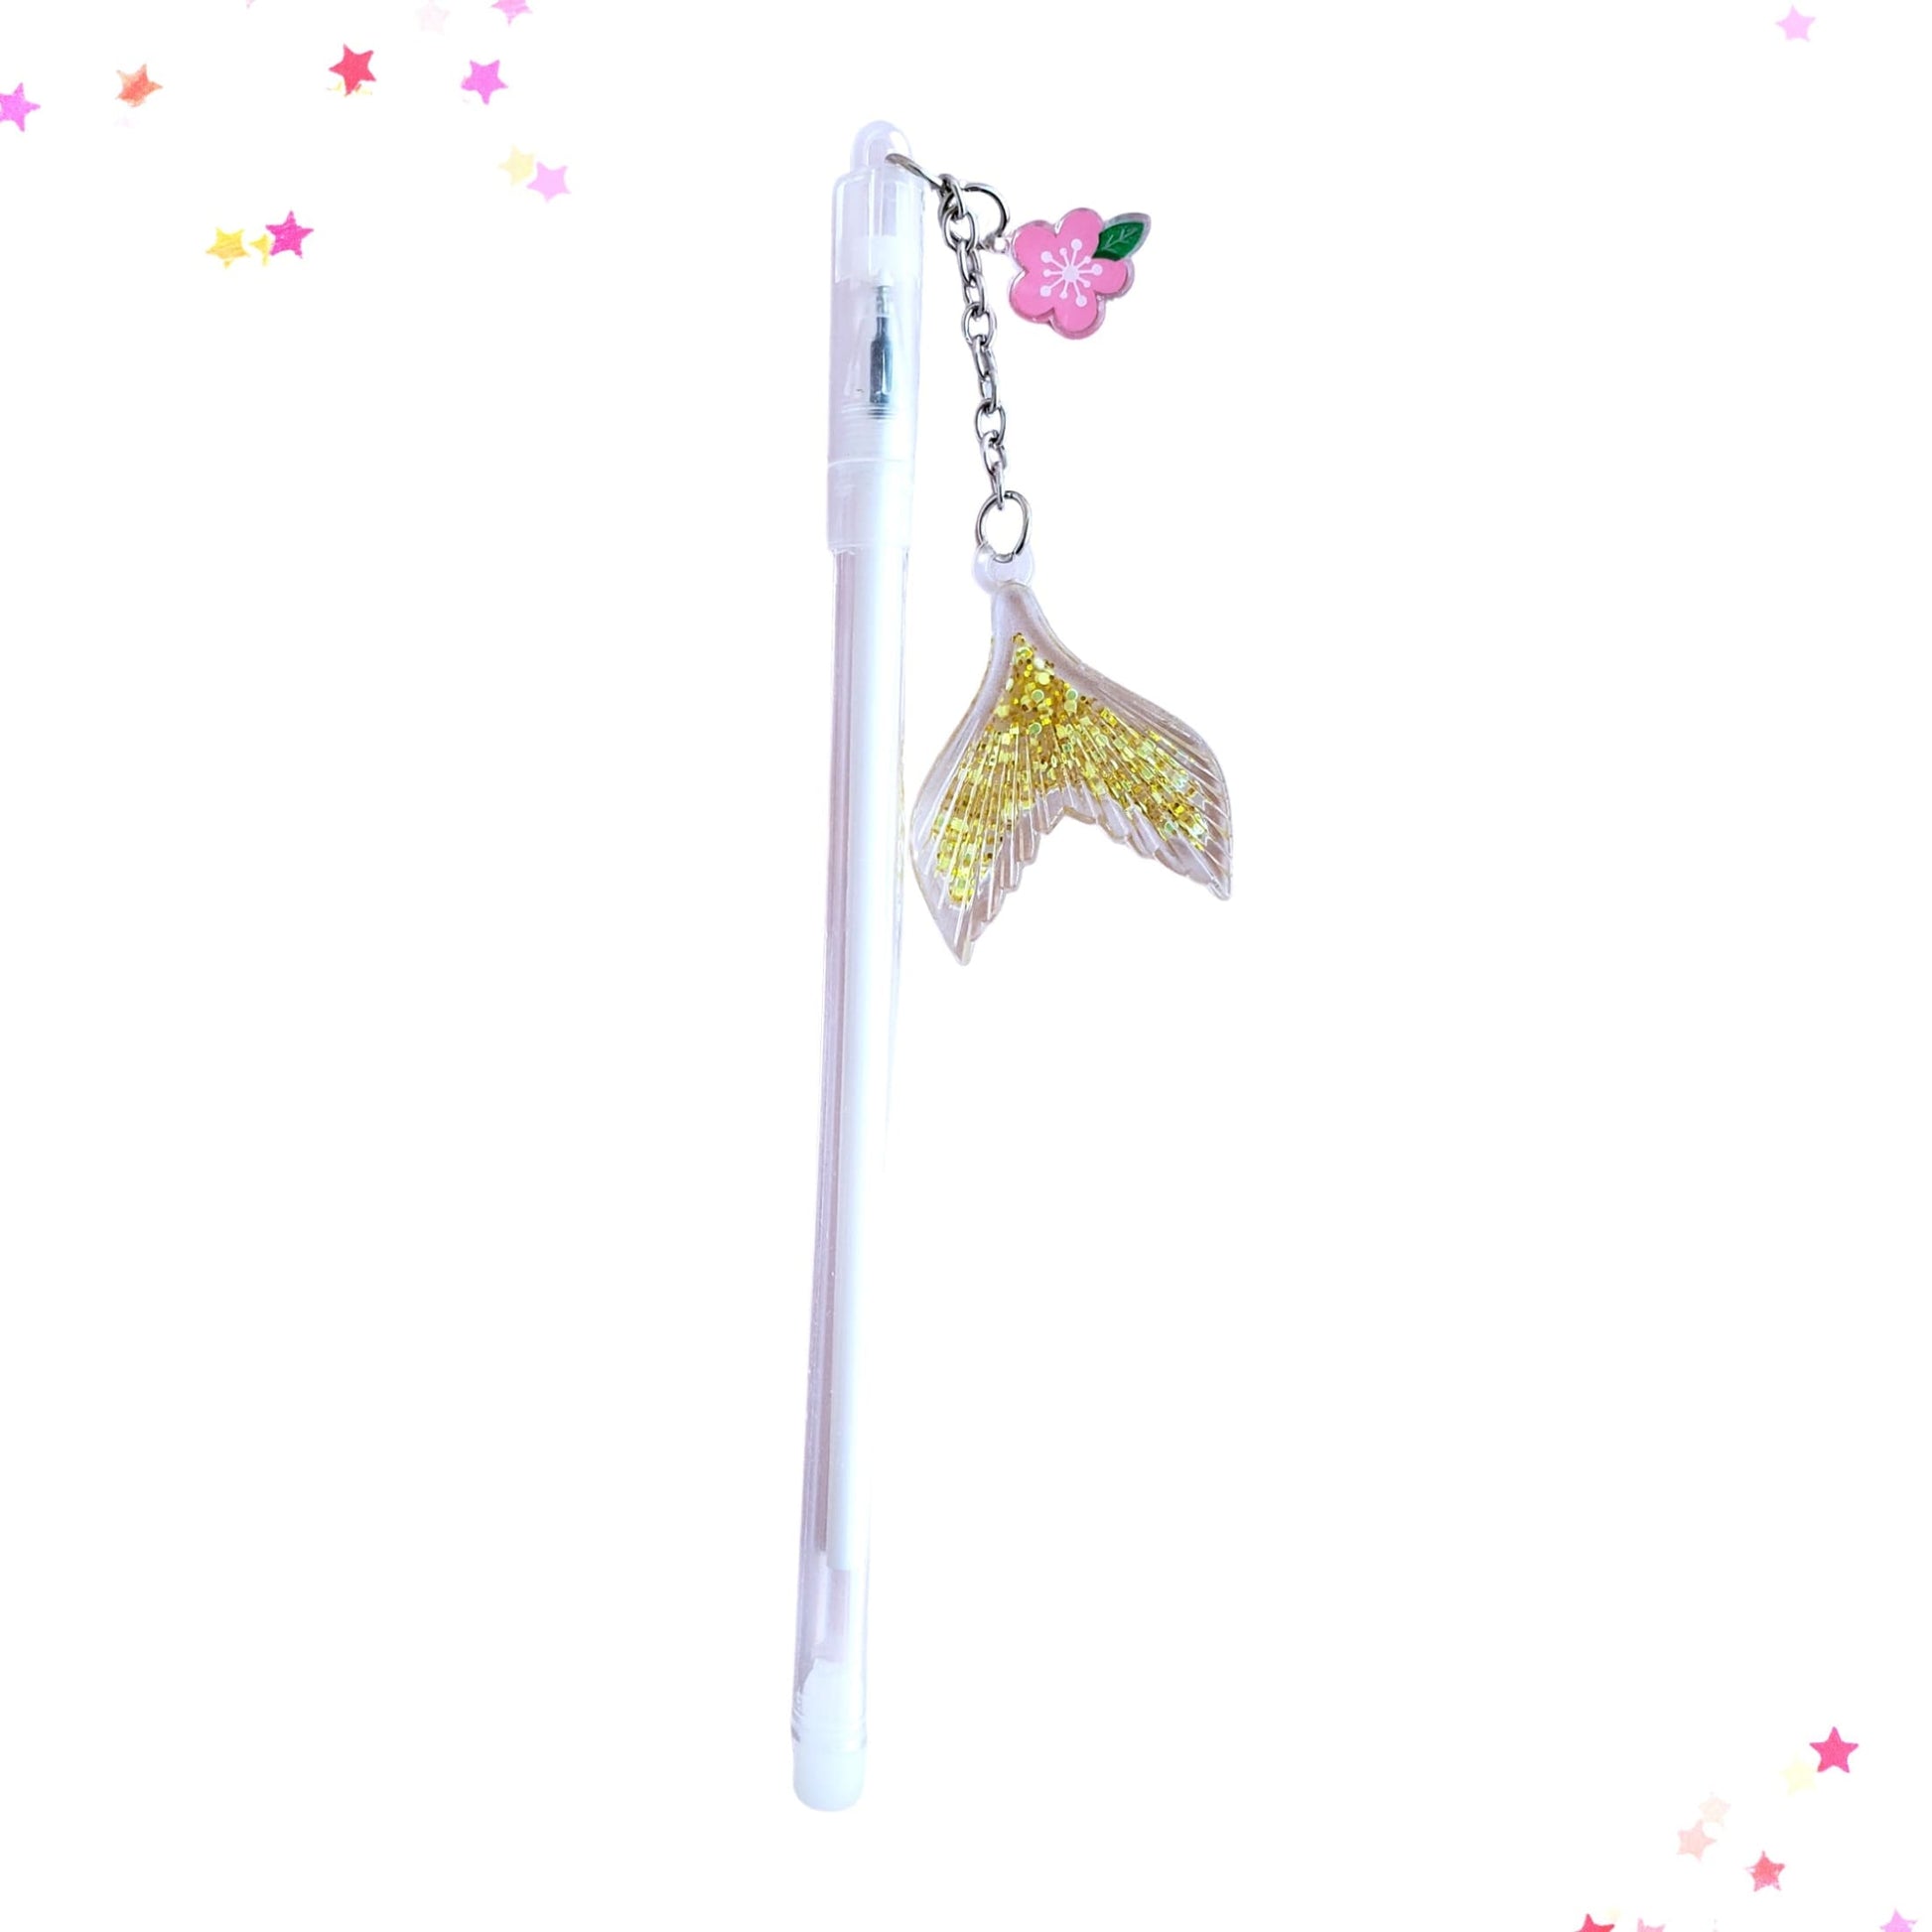 Mermaid Tail Charm Gel Pen in Gold Sparkle from Confetti Kitty, Only 2.99